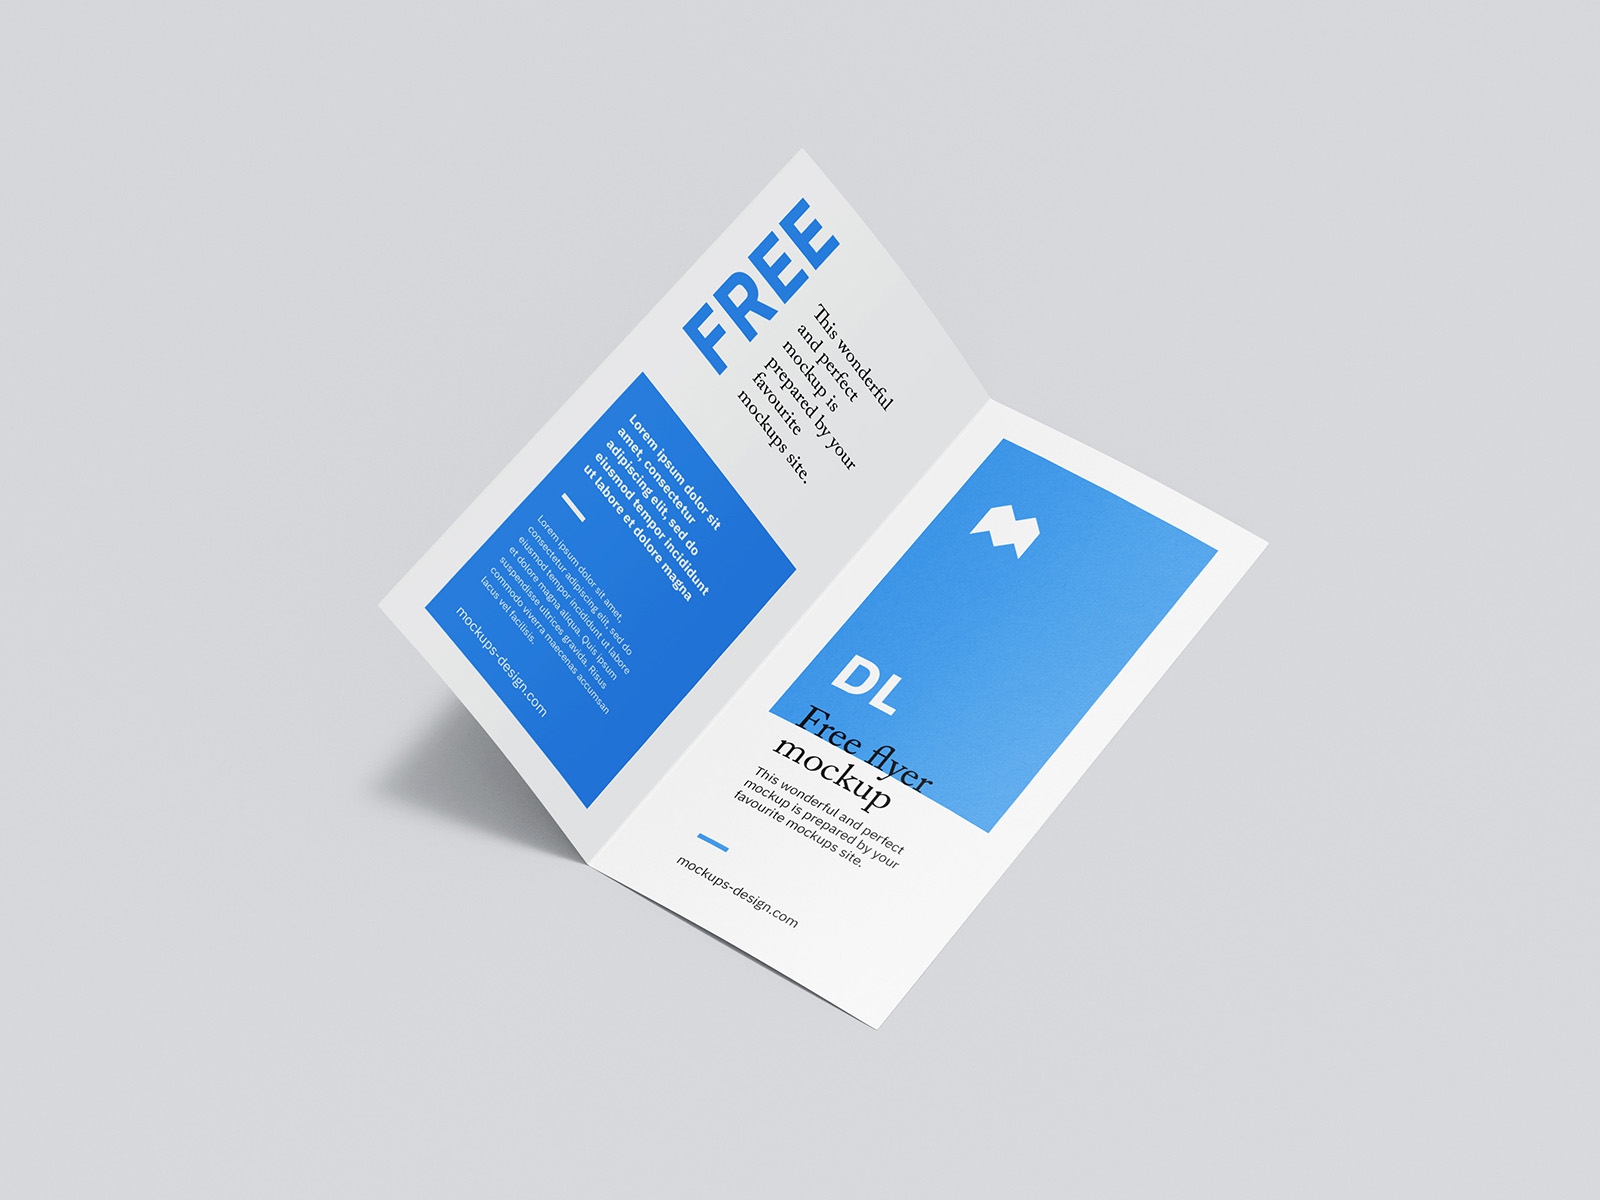 Perspective and Top View of 6 DL Bi-Fold Flyer Mockups FREE PSD